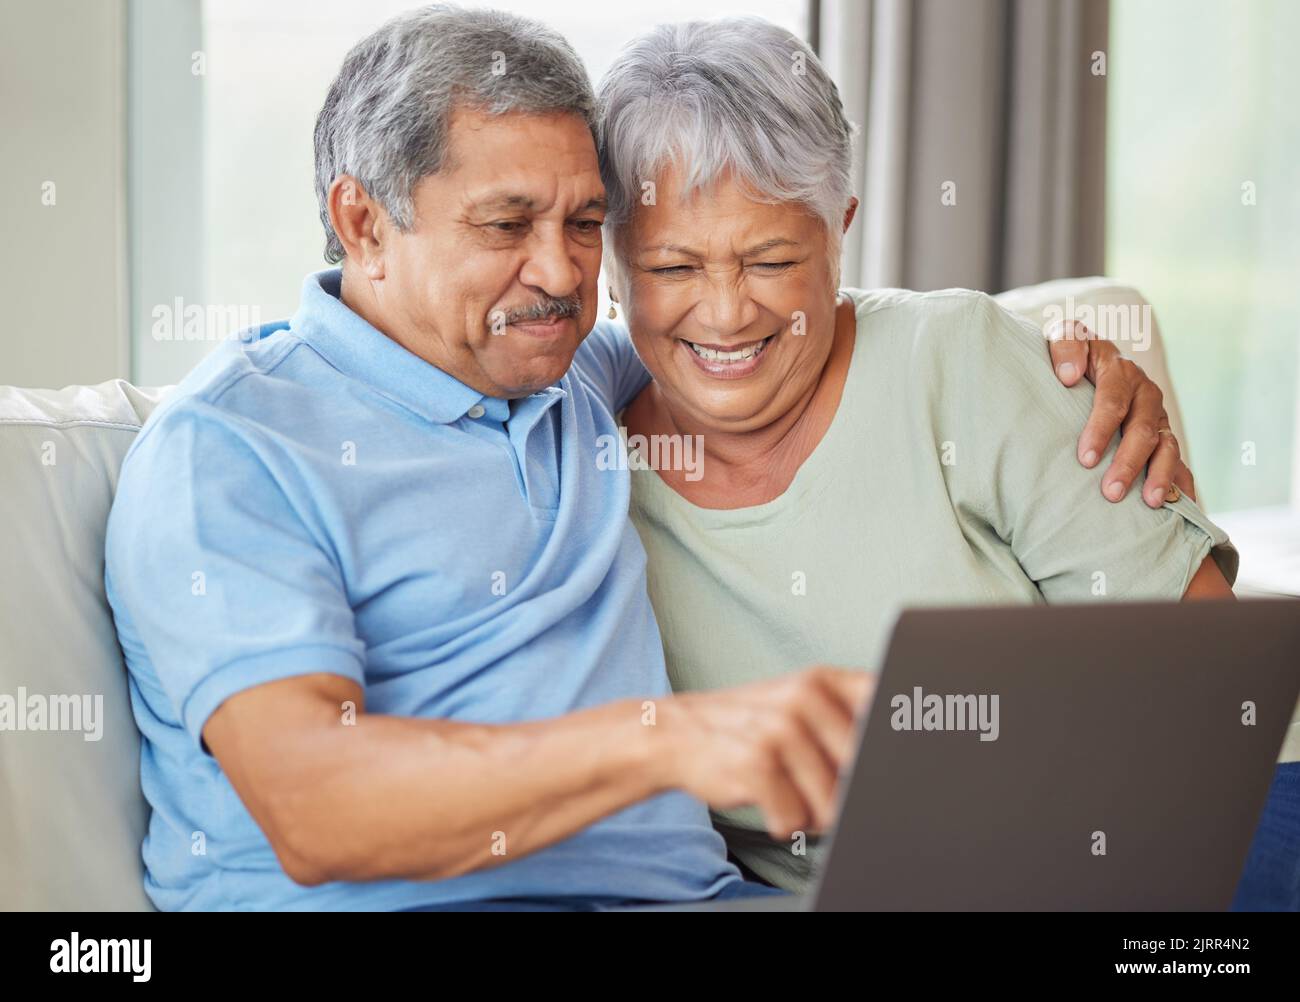 Elderly couple laptop on video call, social media or internet on their laptop on living room sofa. Relax senior man and woman watching or reading news Stock Photo